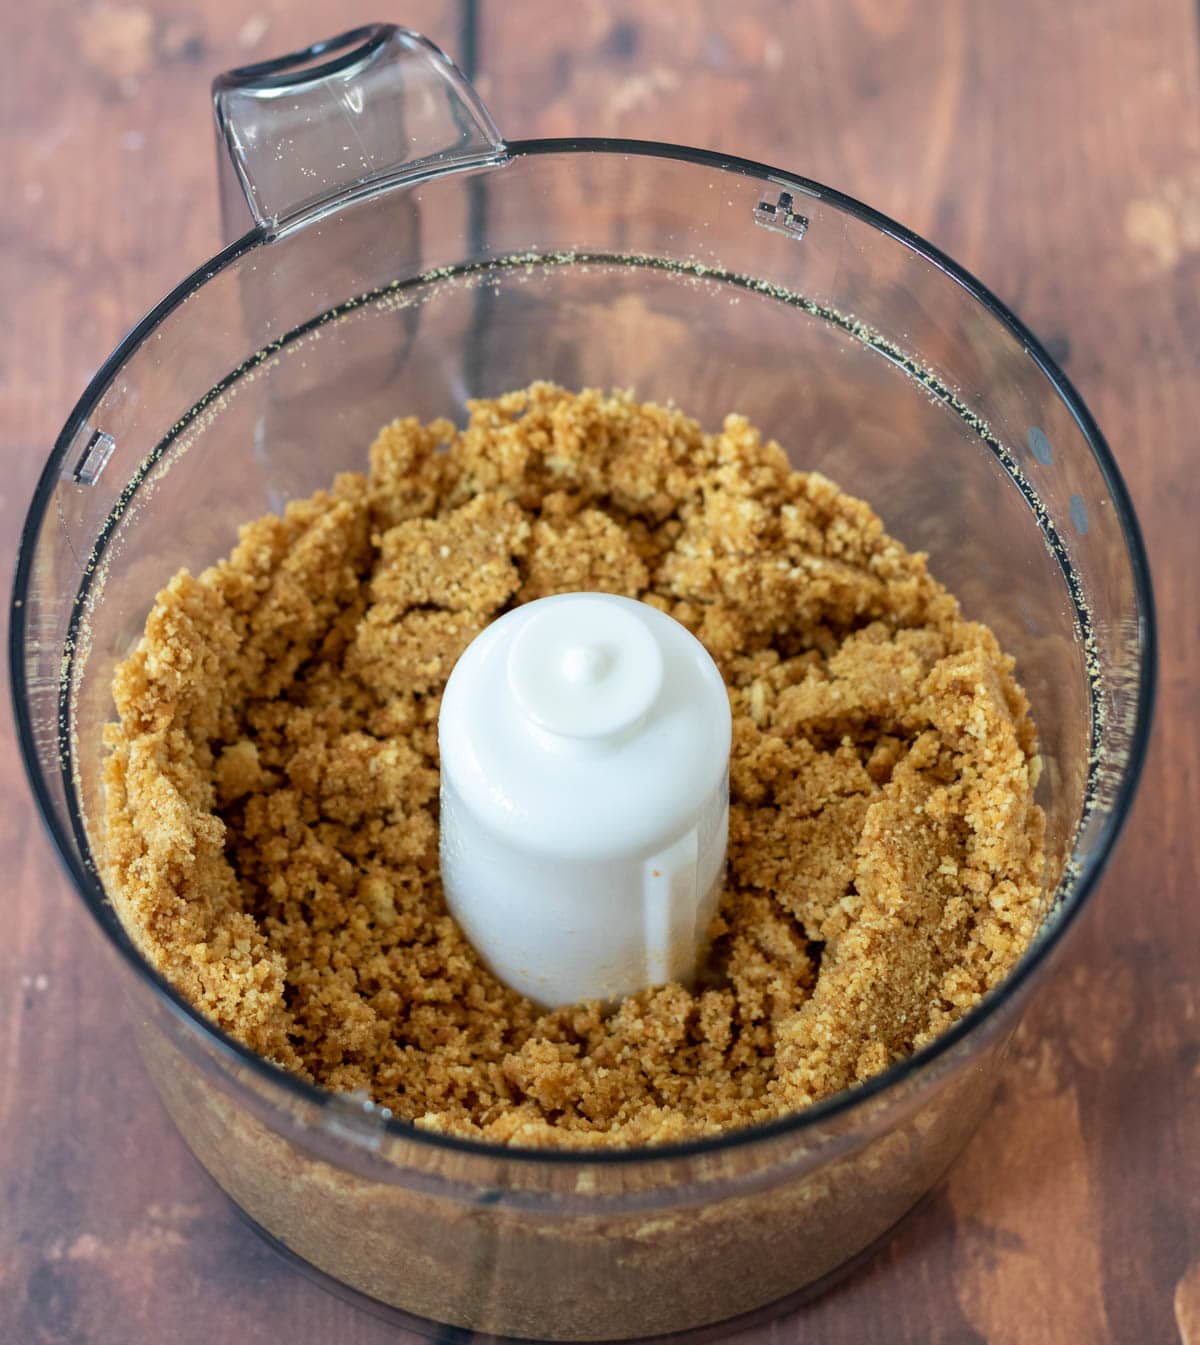 Biscuit crumbs and butter blitzed and combined together in a food processor.